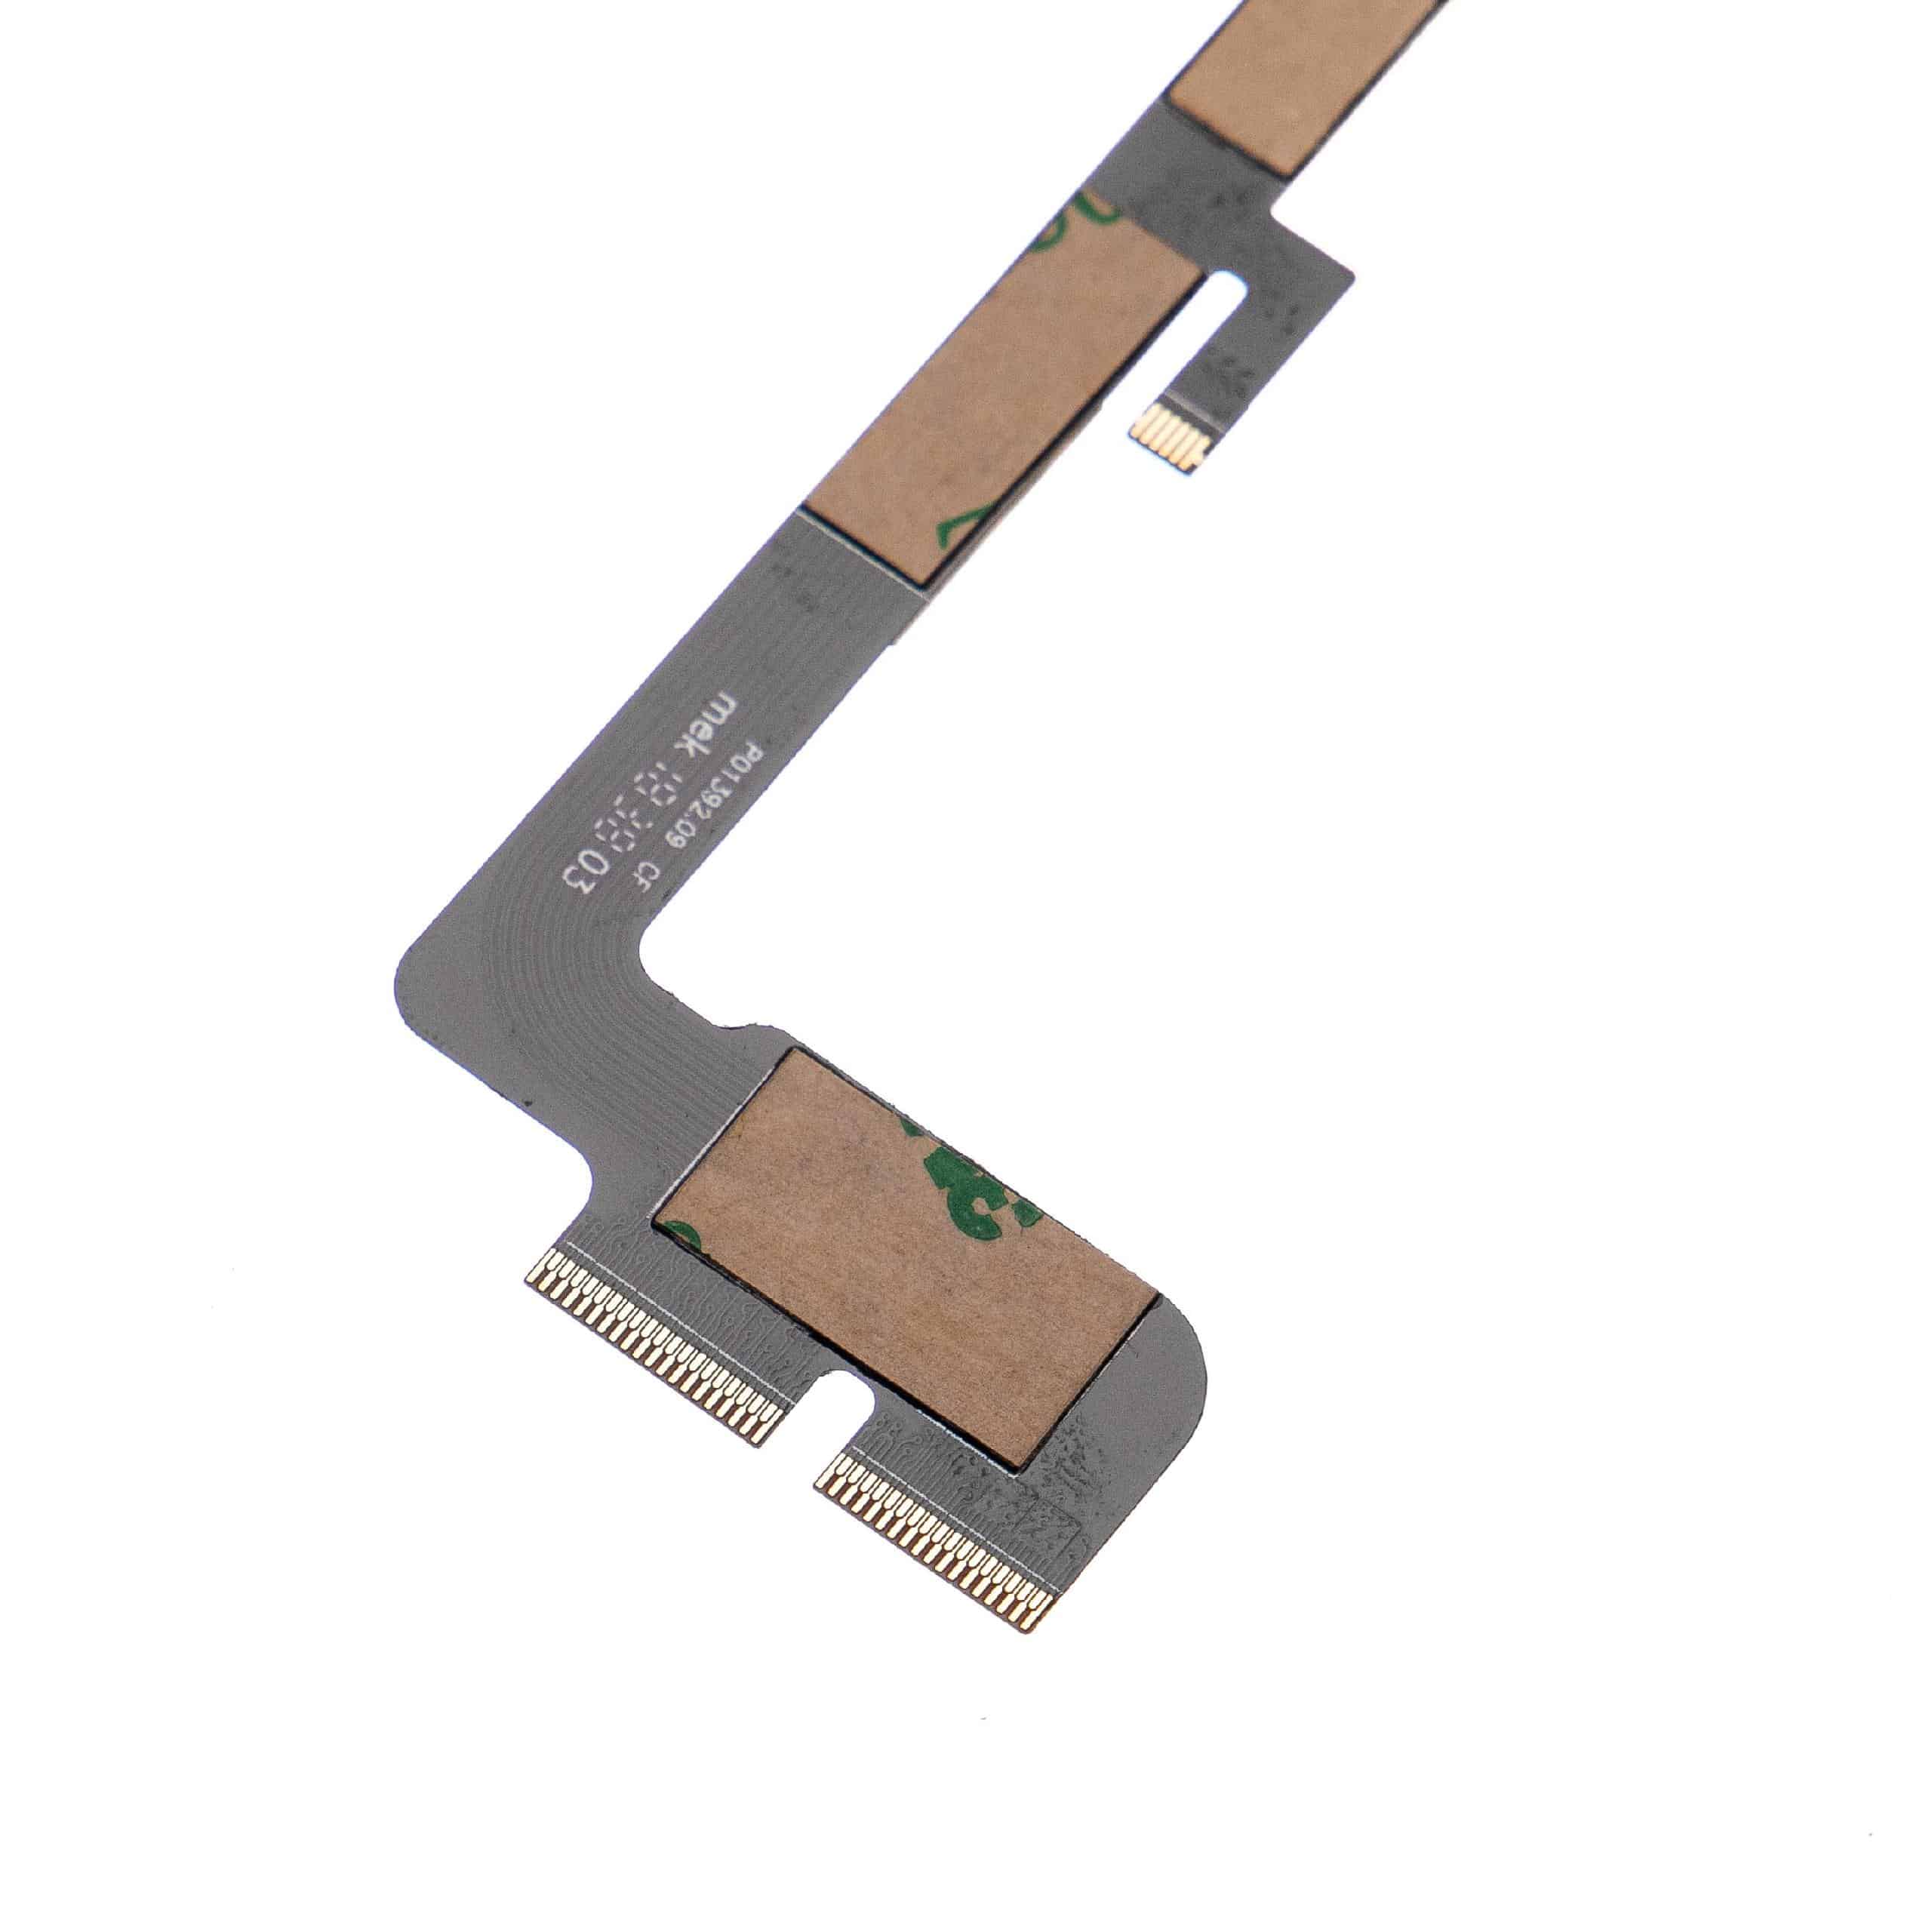 Ribbon Flex Cable suitable for DJI Phantom 4 Drone, Gimbal - with double-sided tape